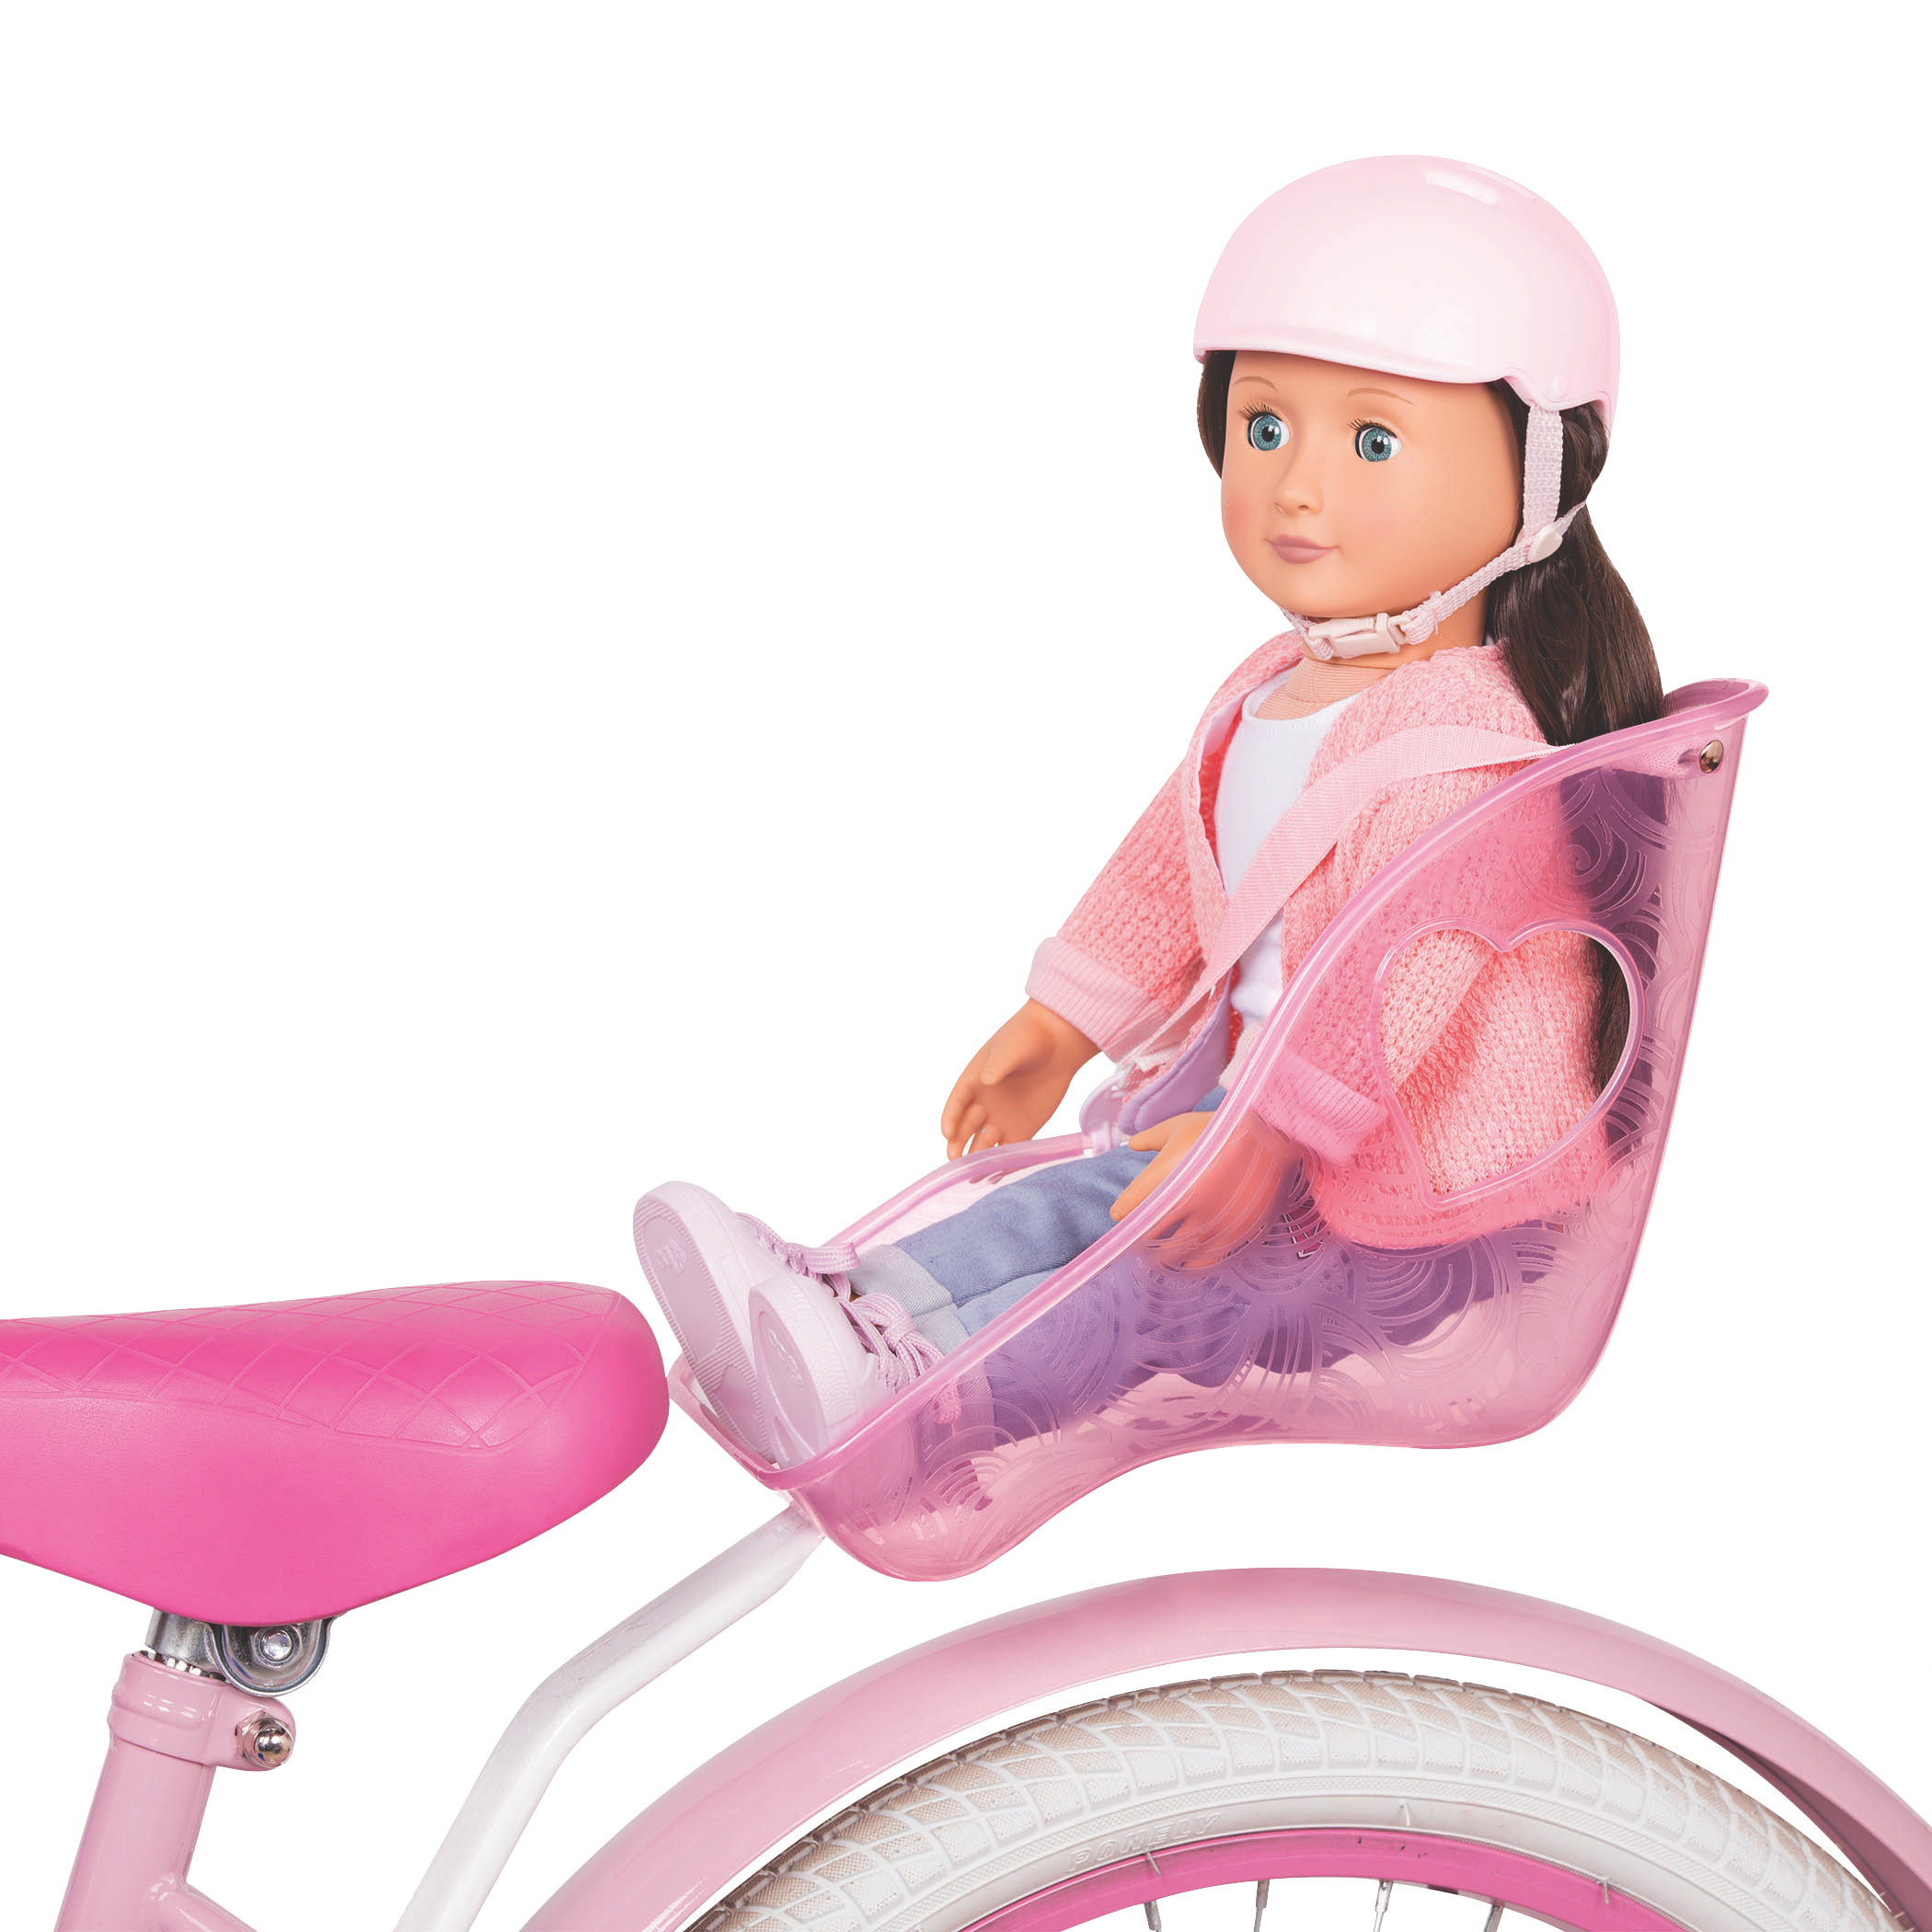 TOP CASE DOLL BIKE SEAT HOLDER FOR GIRL BIKE PINK UNIVERSAL FIXING SYSTEM TOY 